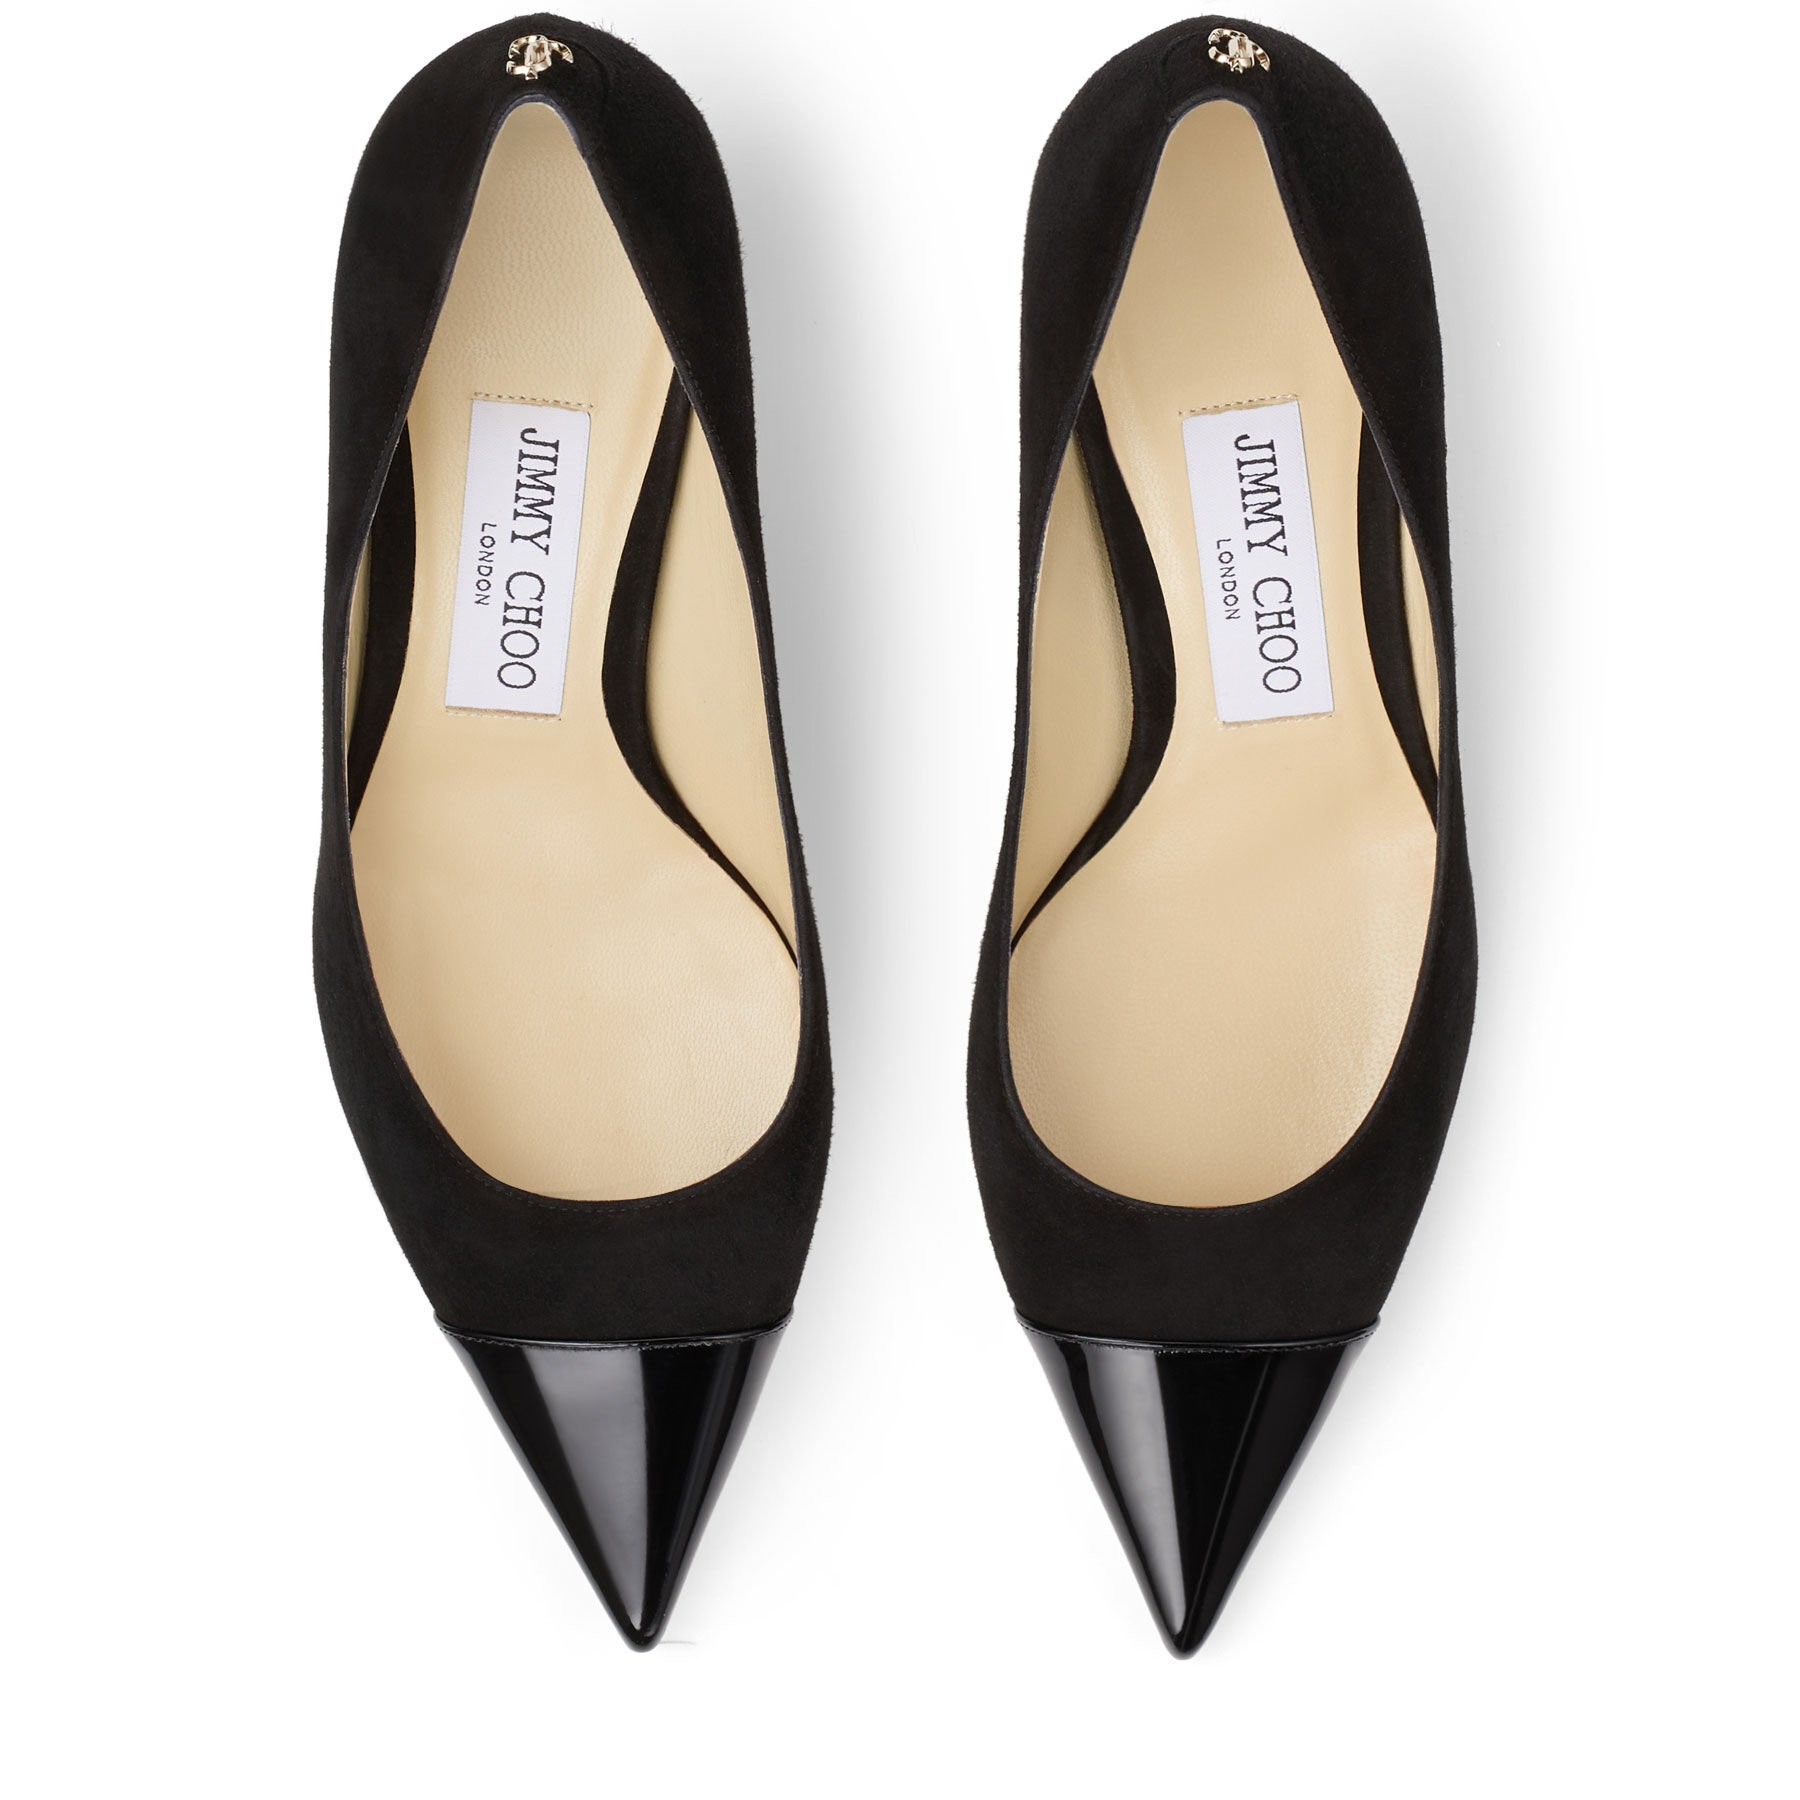 Black Suede and Patent Leather Pointed Pumps with JC Emblem | RENE 65 ...